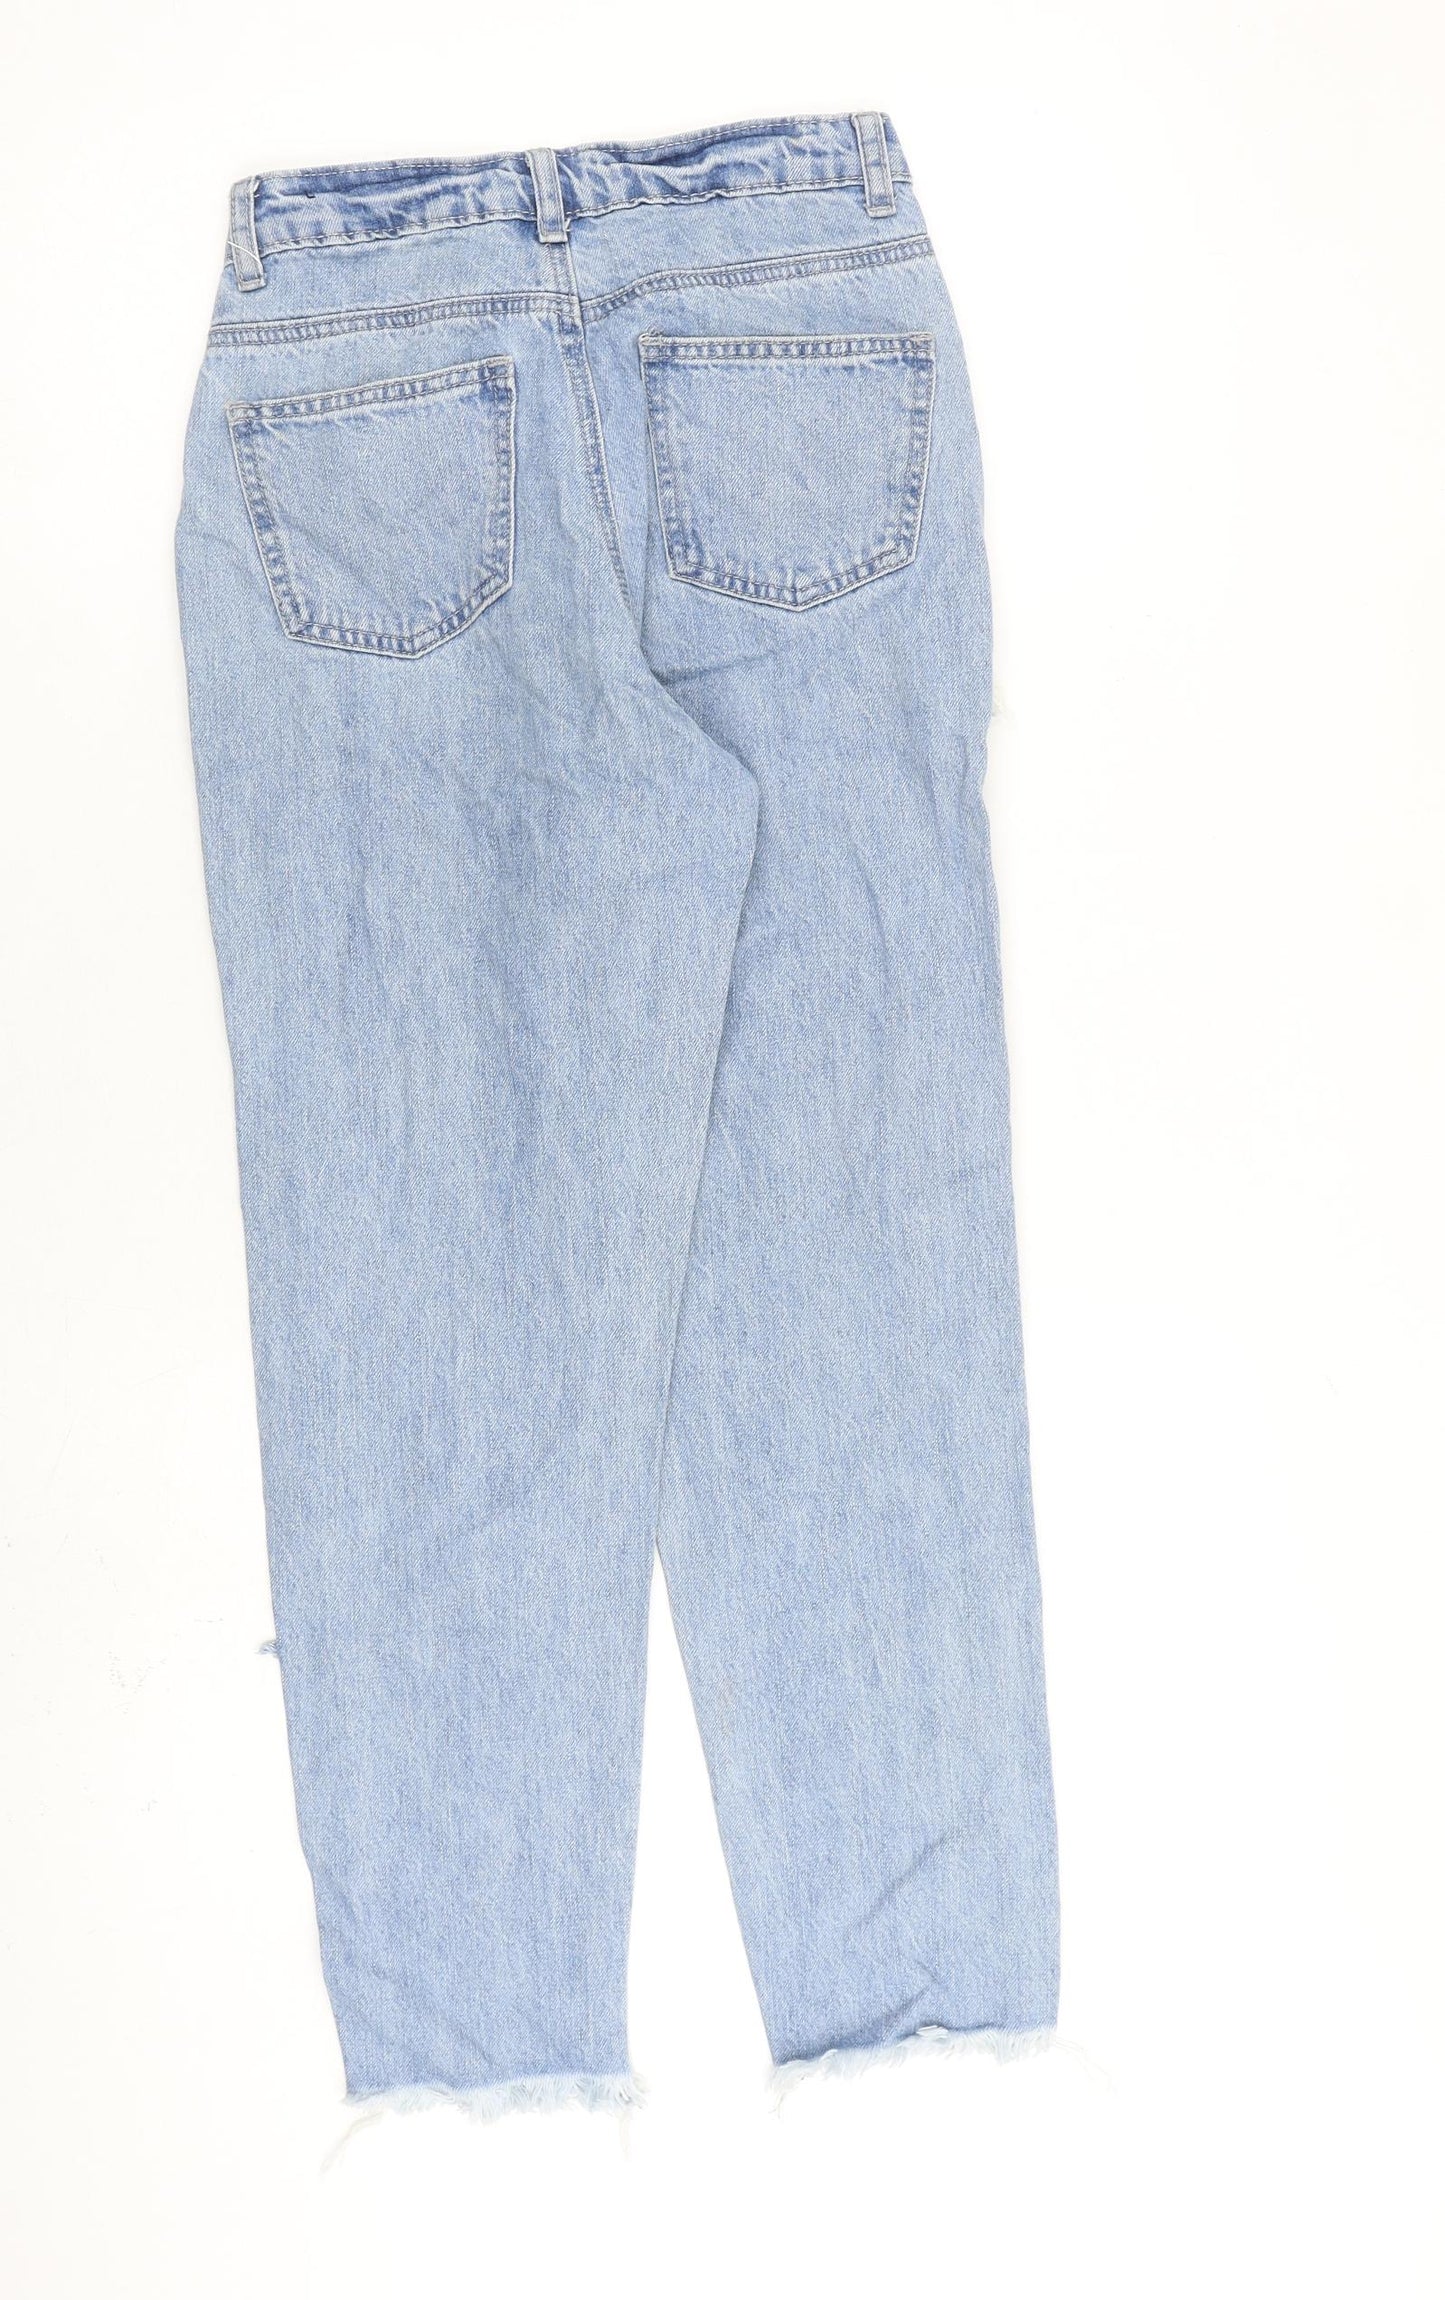 Missguided Womens Blue Cotton Mom Jeans Size 6 L26 in Regular Zip